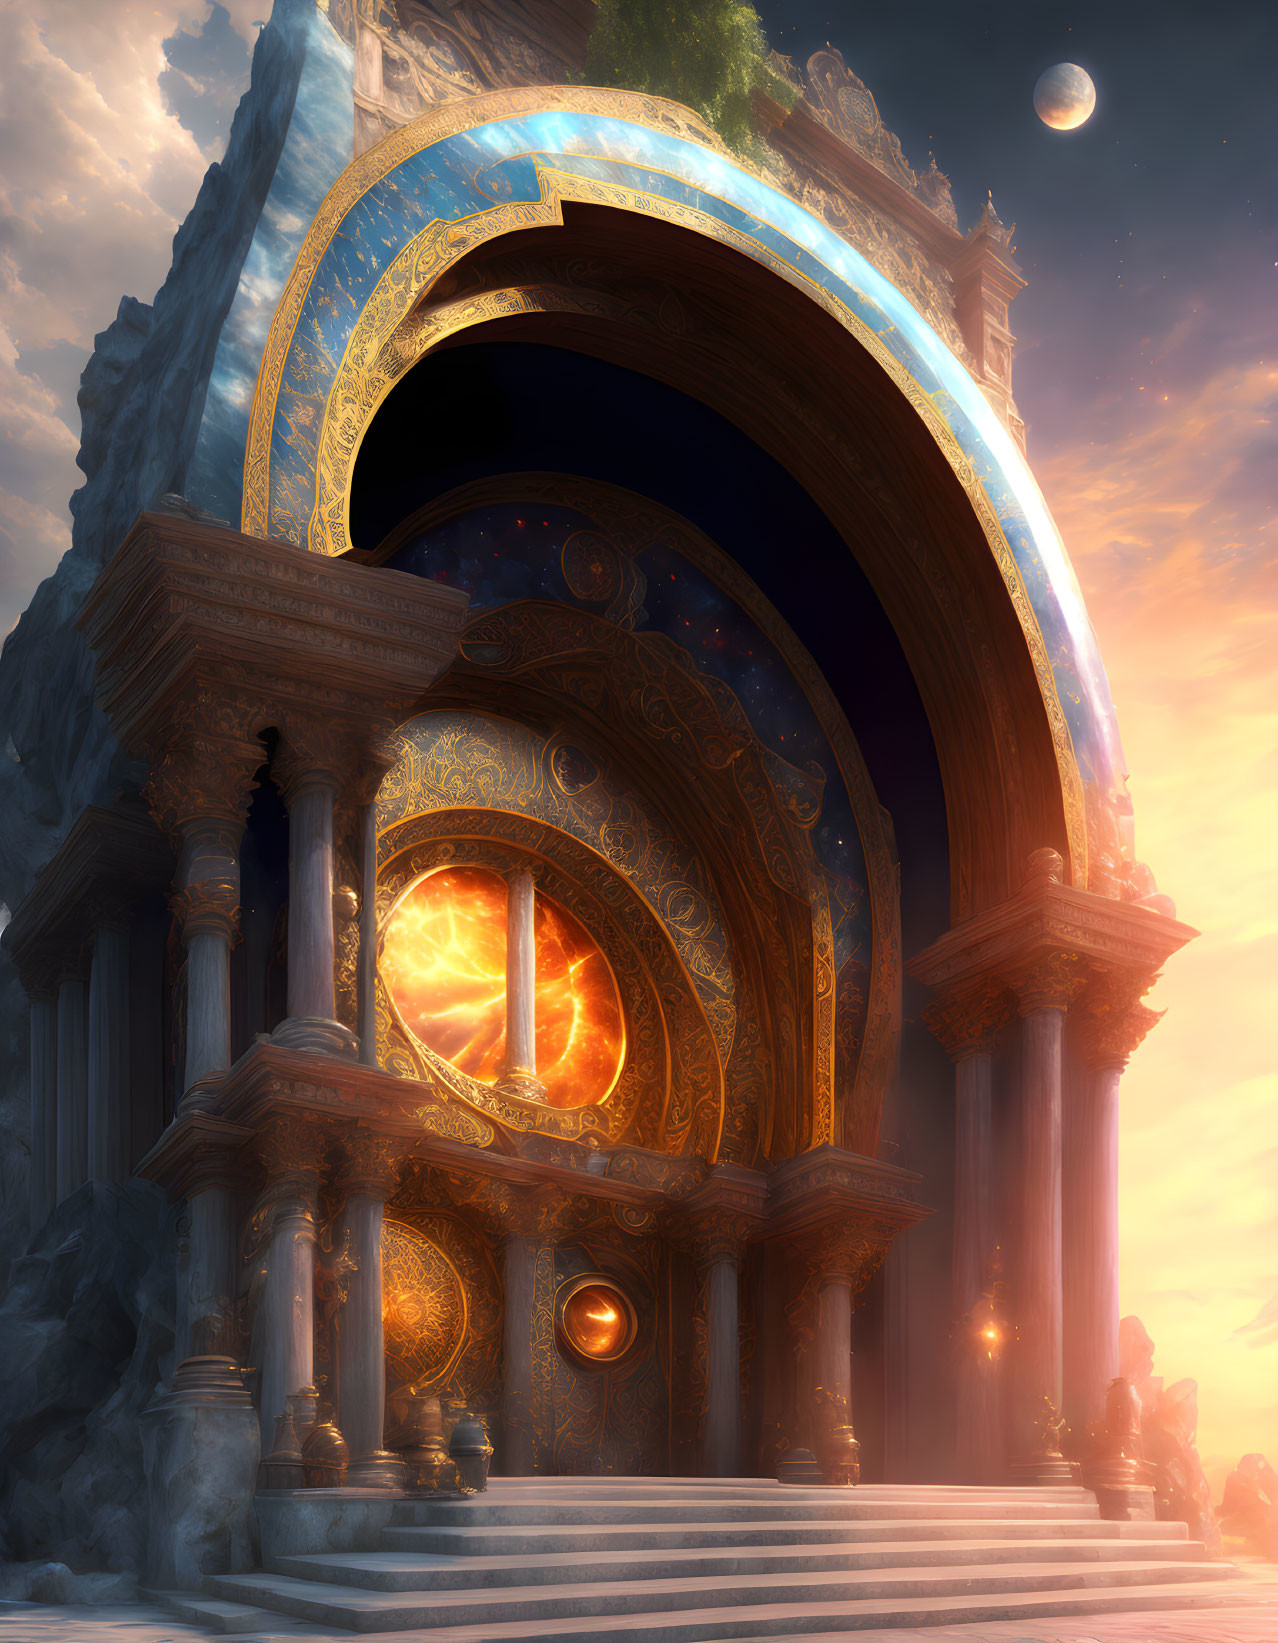 Fantasy temple with ornate arches under glowing sky